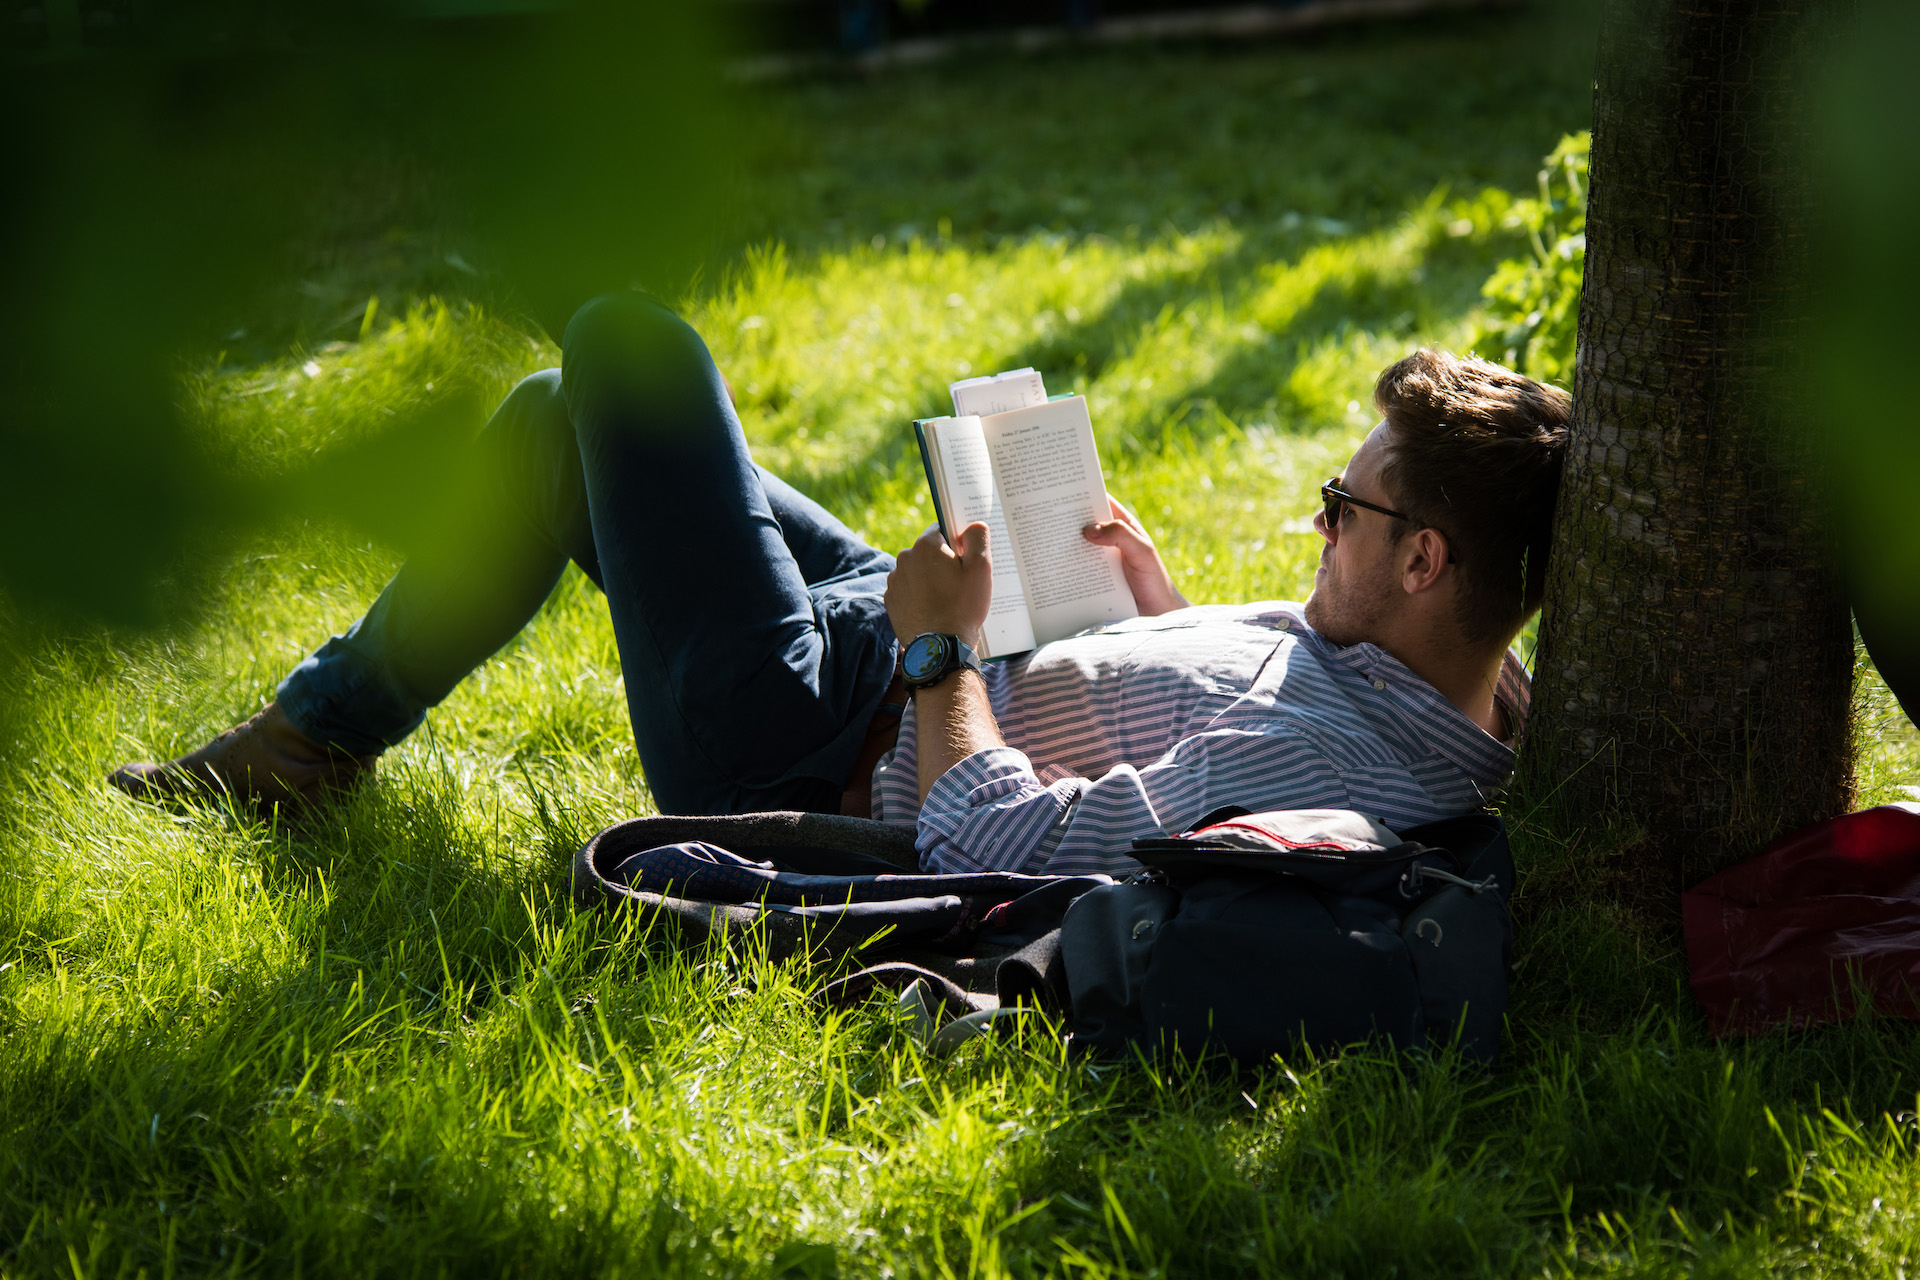 Reader in the sun on the grass